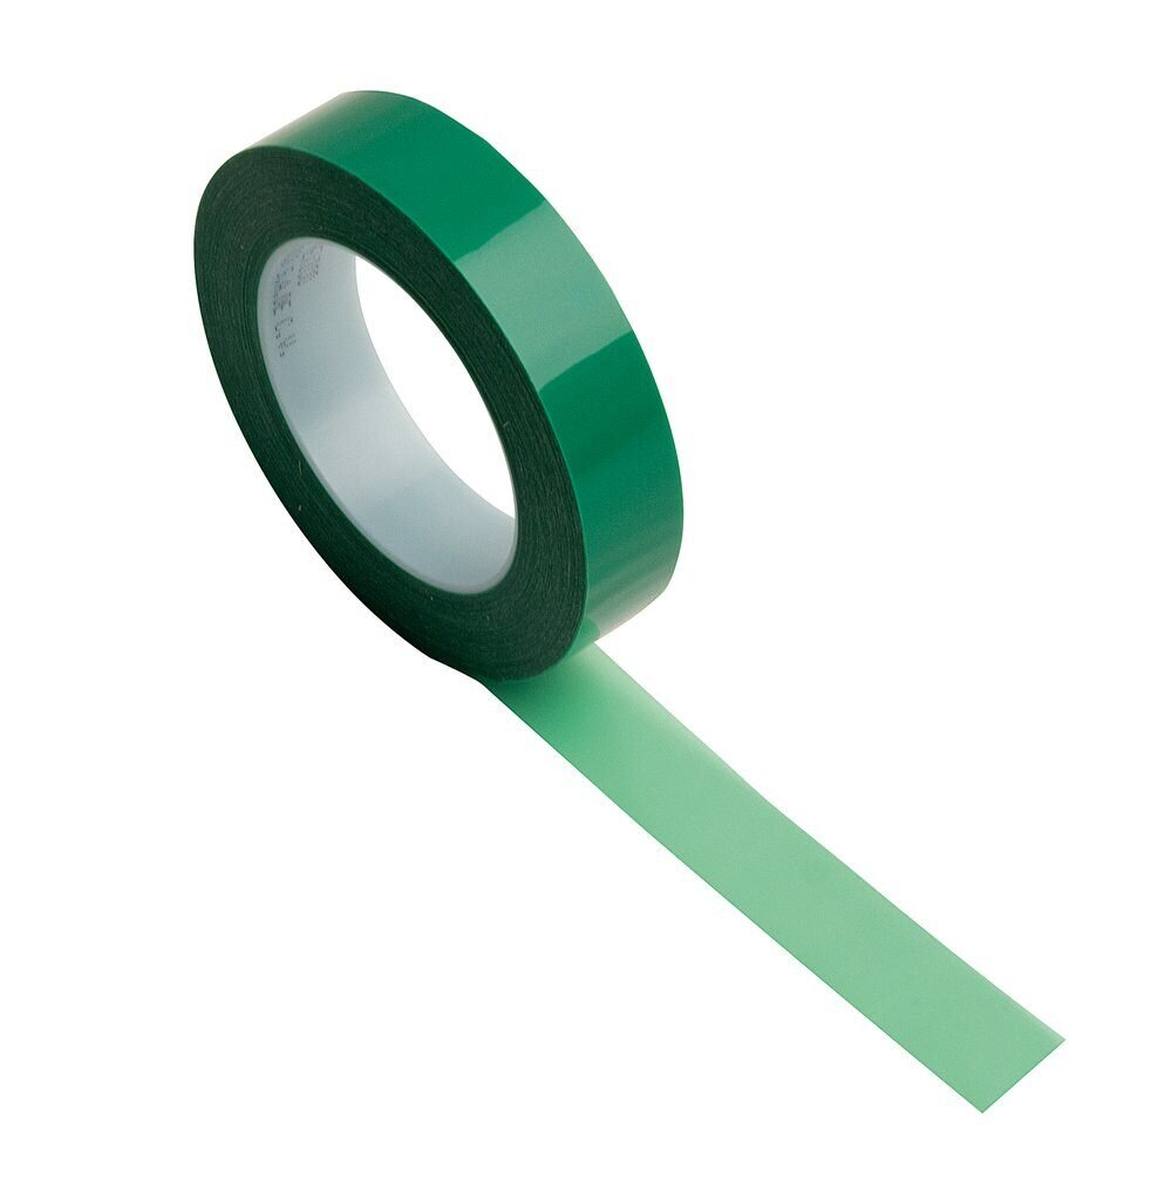 3M High-temperature polyester adhesive tape 851, green, 38.1 mm x 66 m, 101.6 Âµm